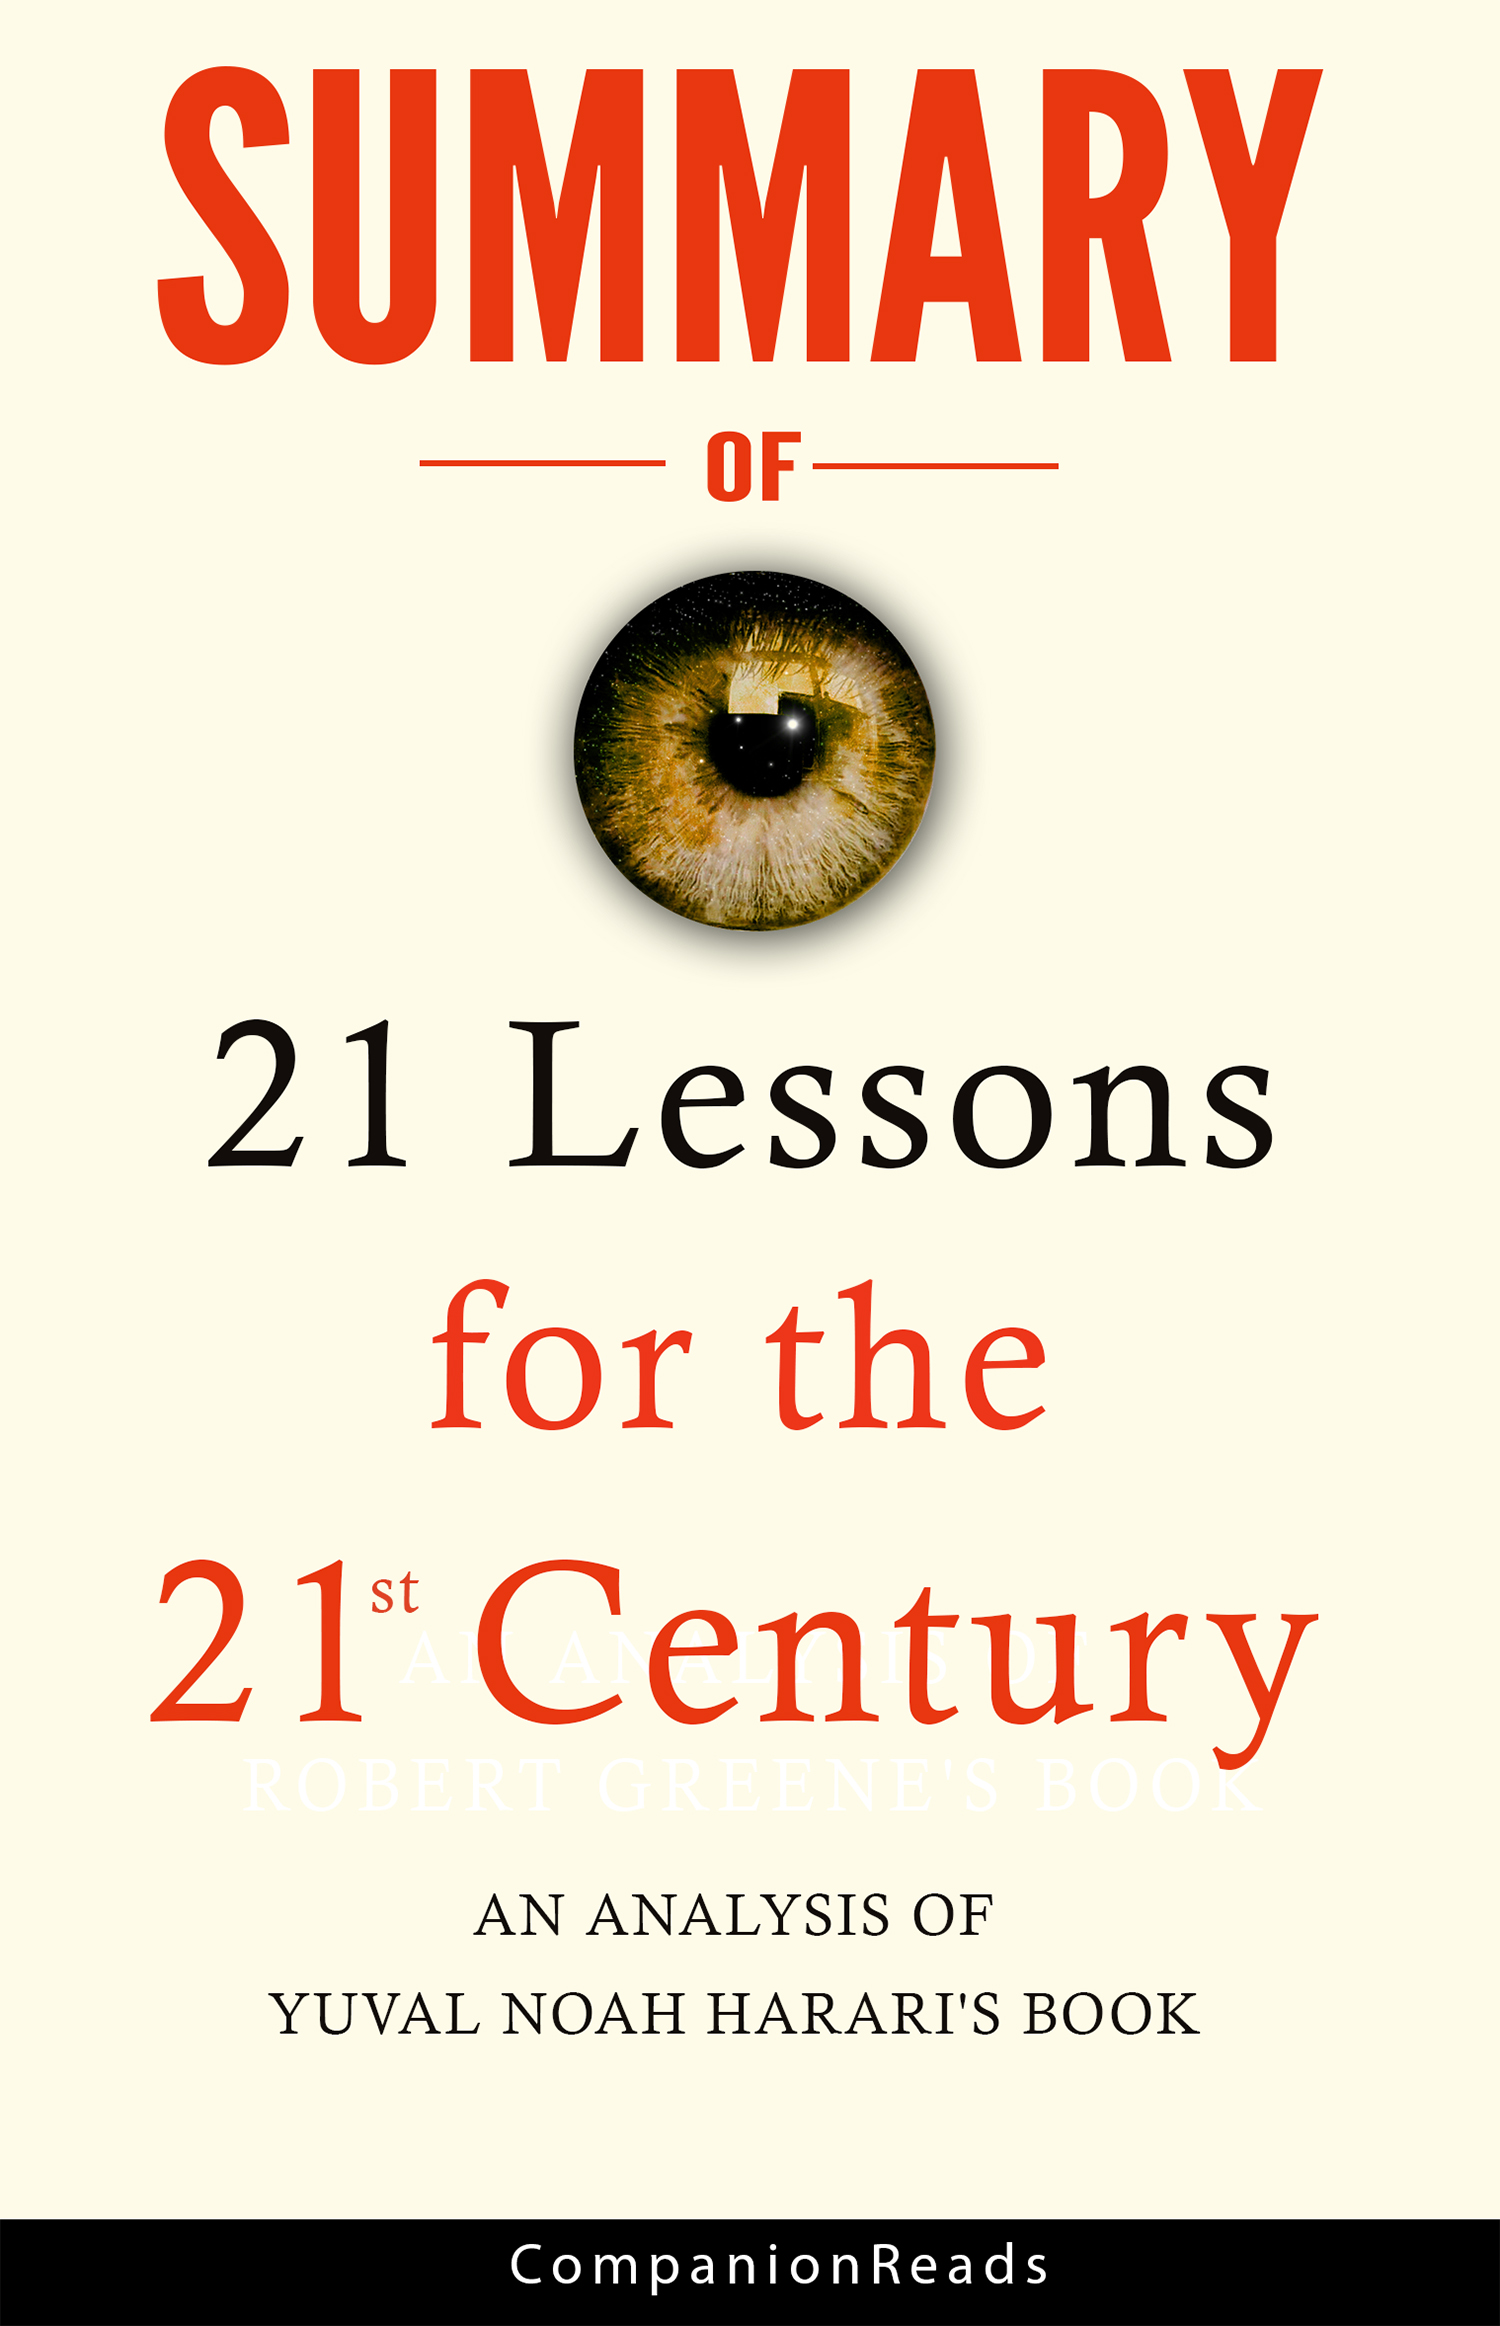 FREE: Summary of 21 Lessons for the 21st Century: An Analysis of Yuval Noah Harari’s Book by CompanionReads Summary